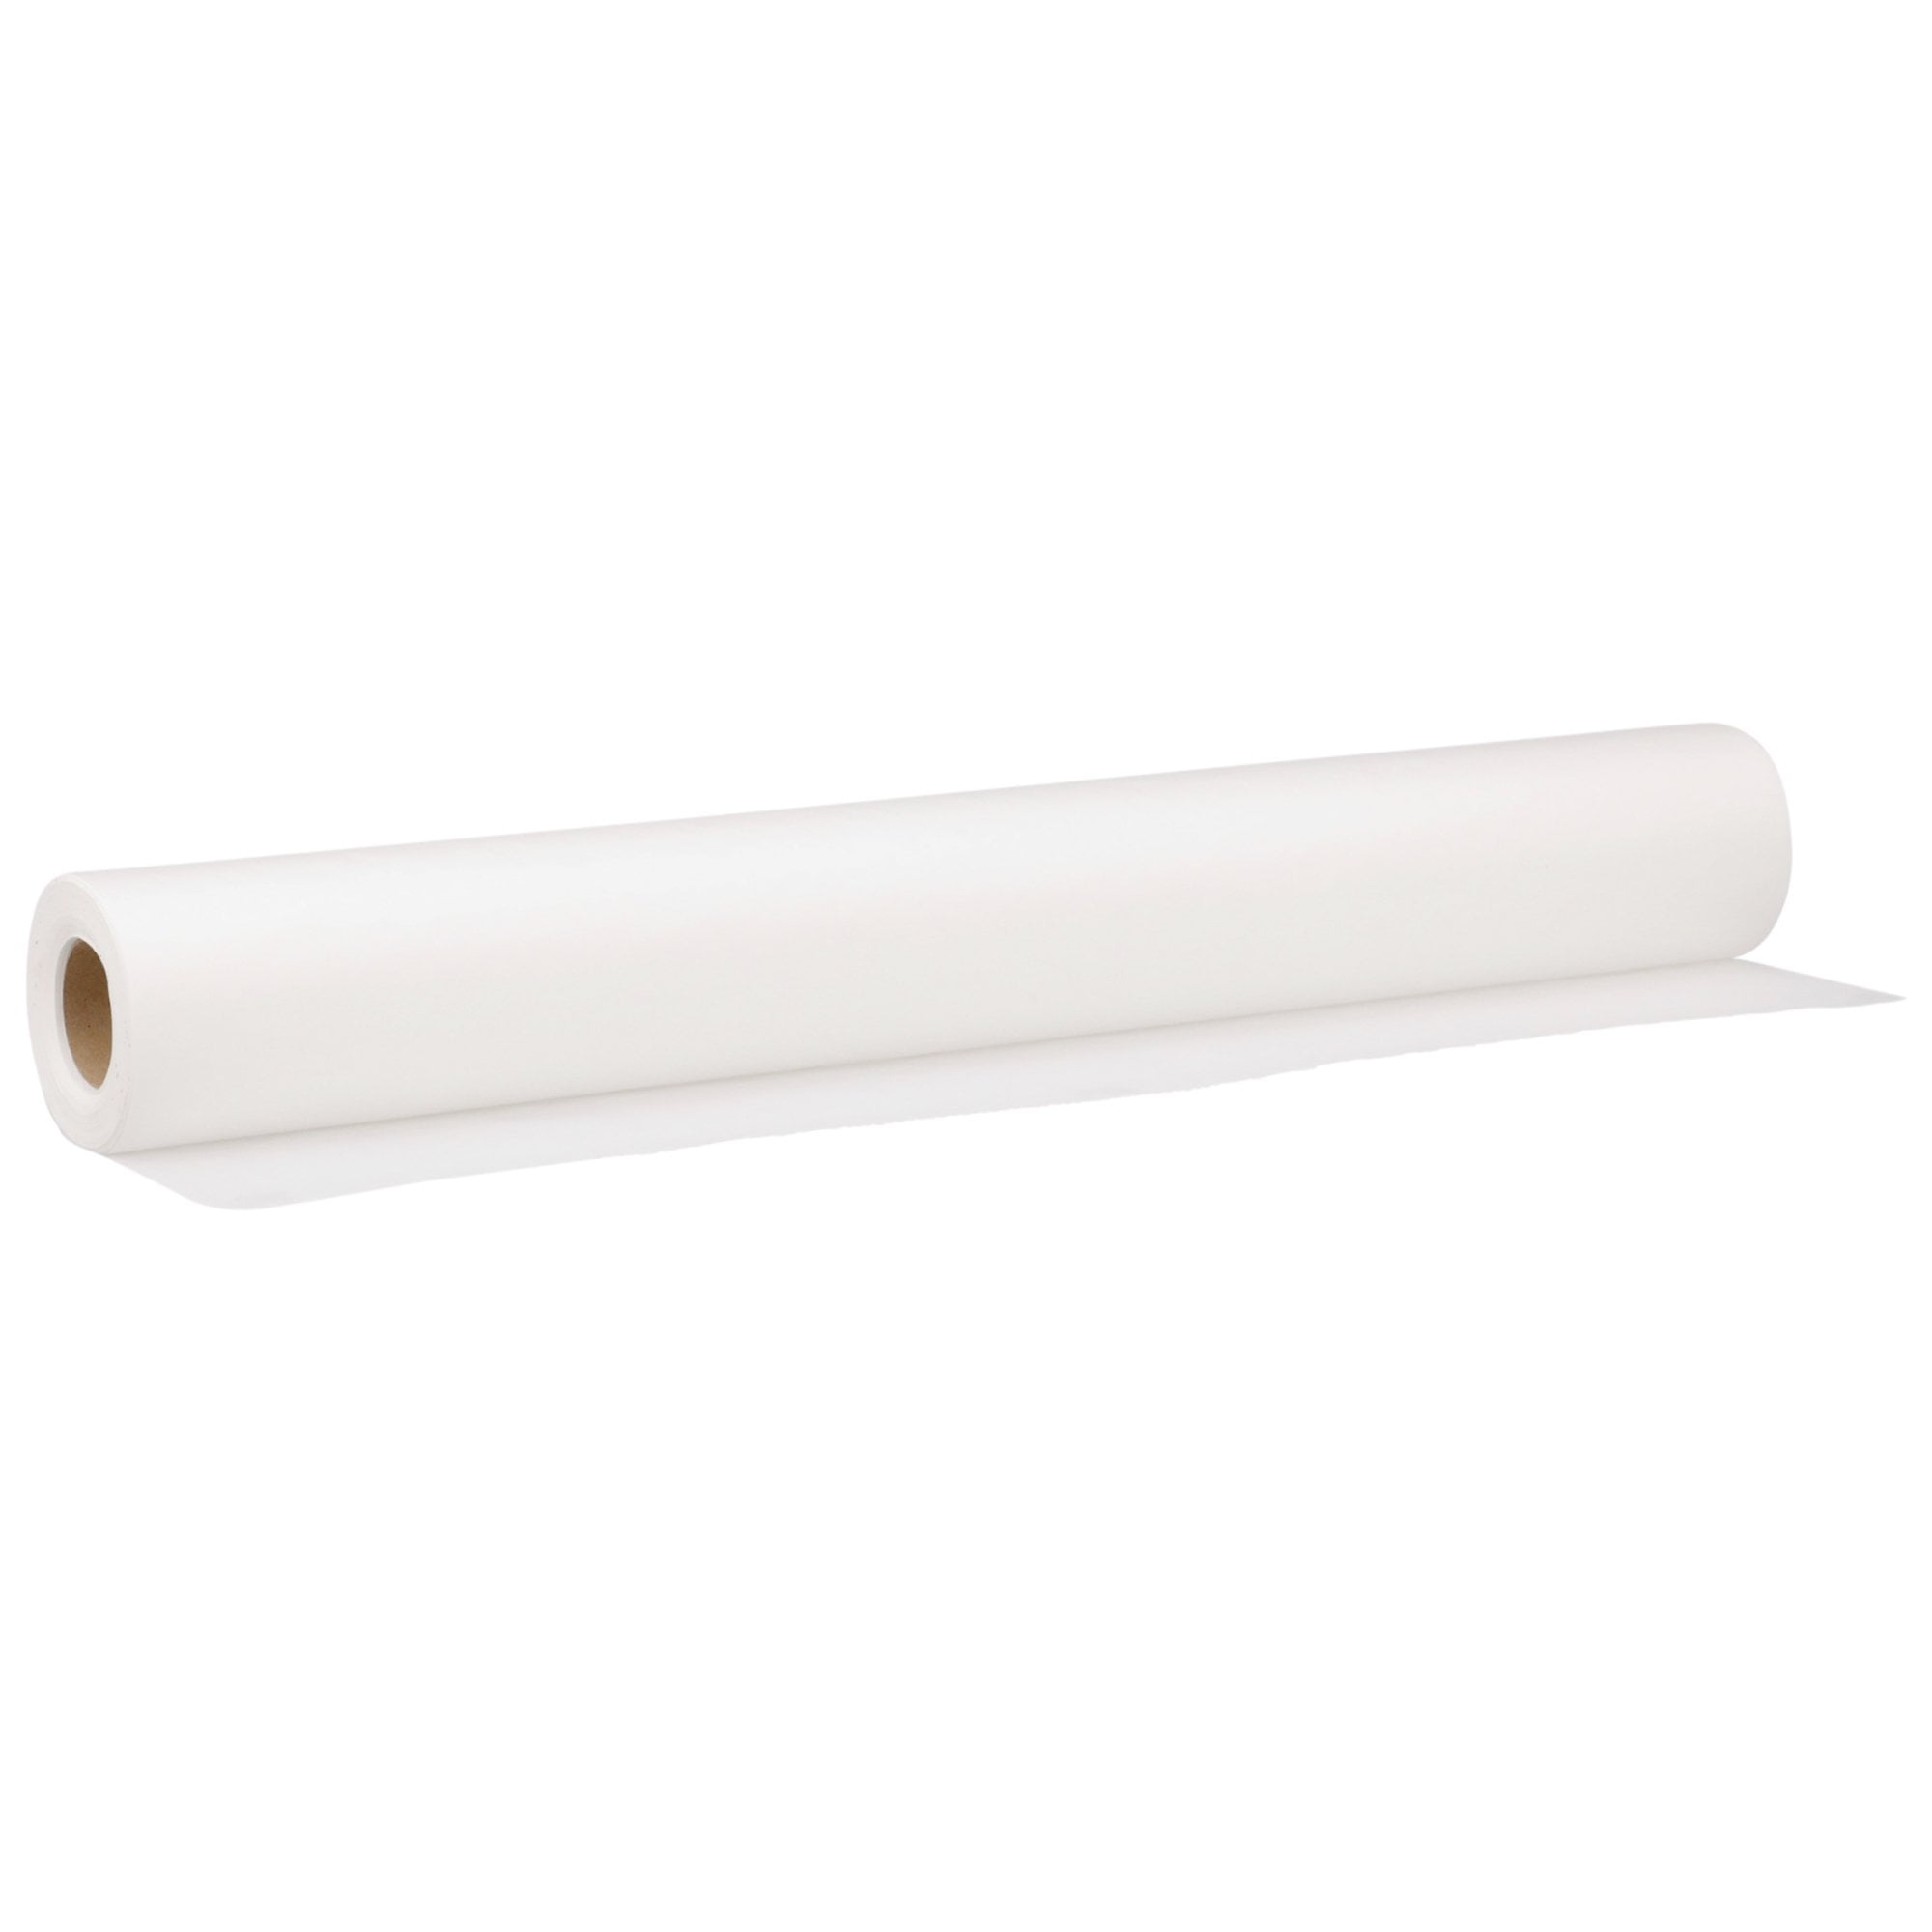 Table Paper McKesson 18 inch White Smooth